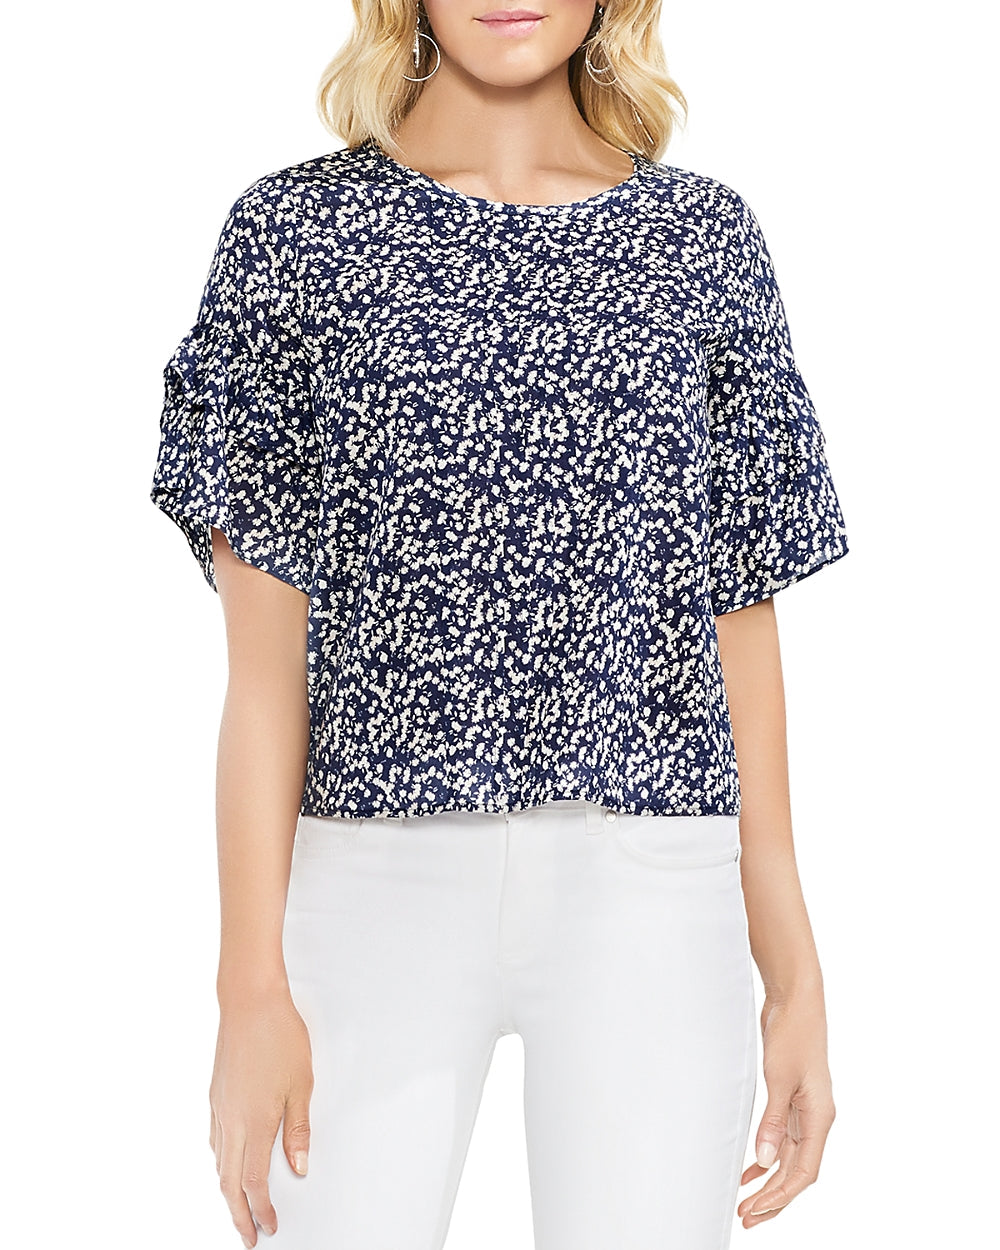 Vince Camuto Womens Printed Ruffled Top